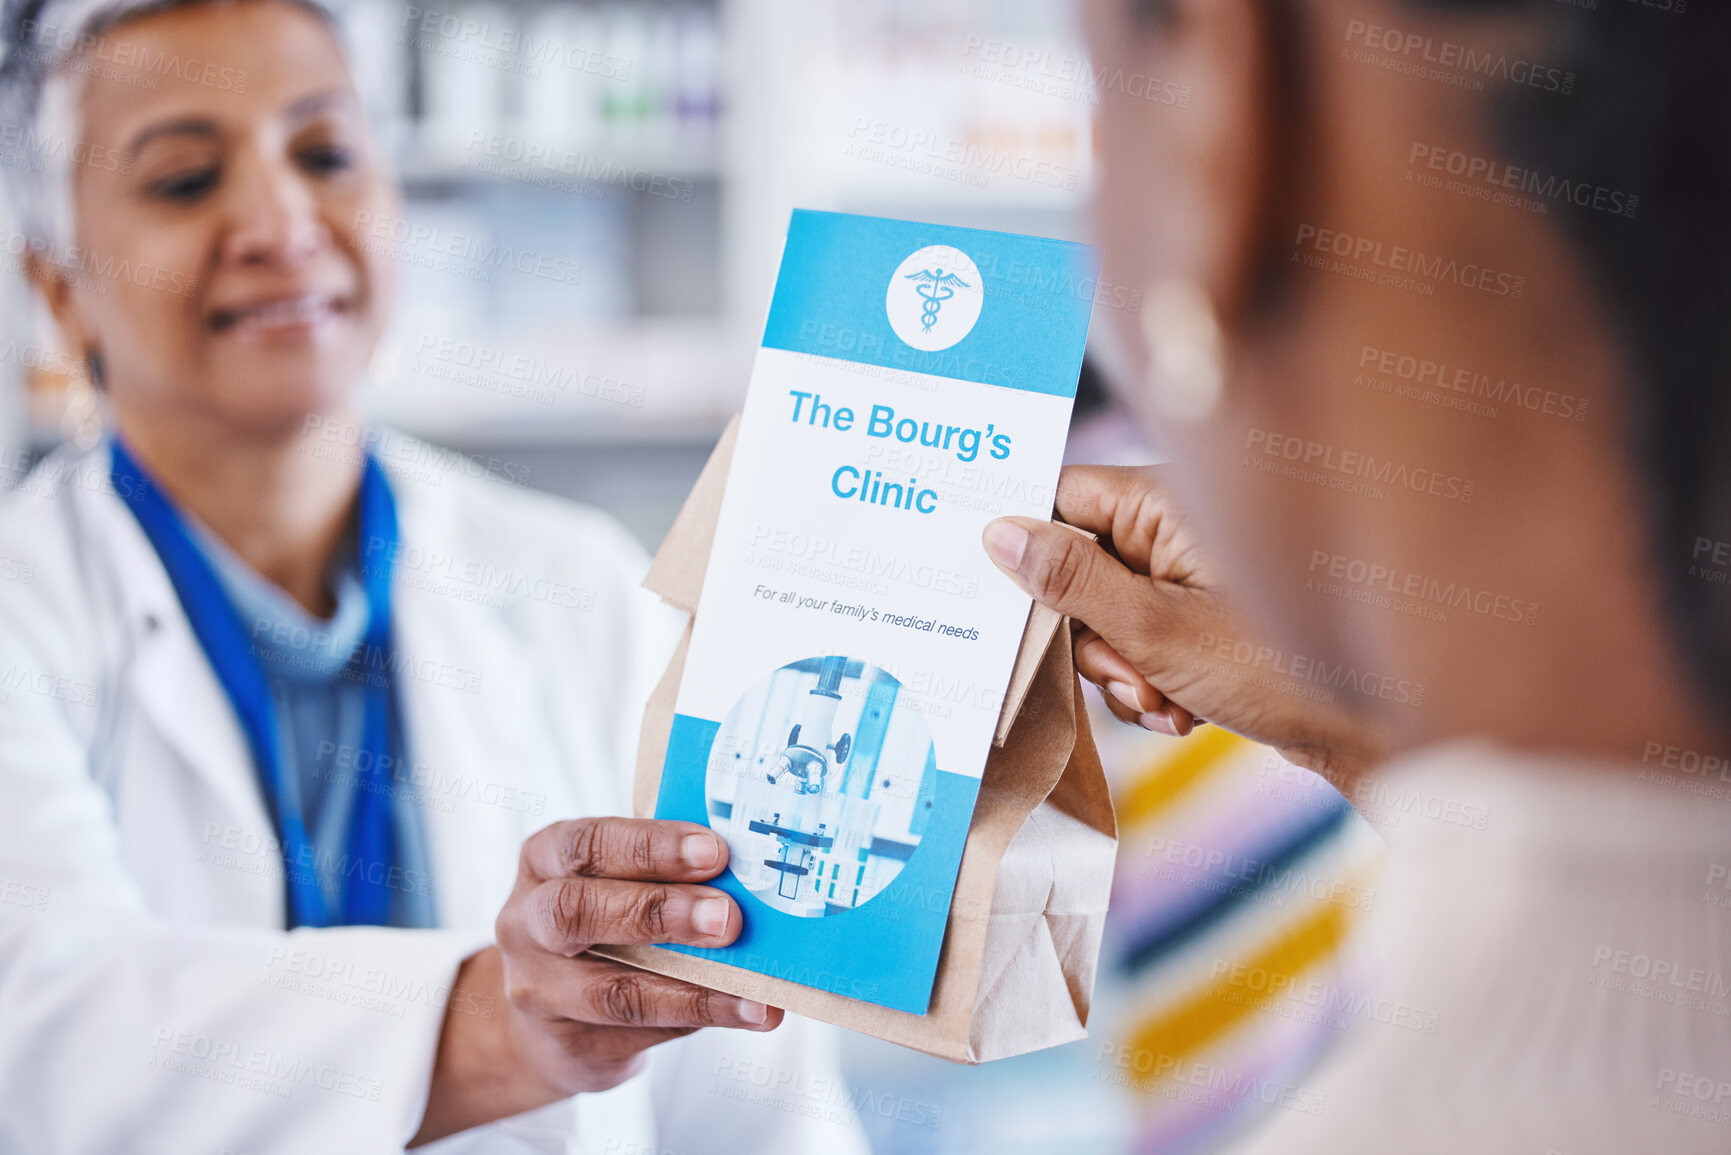 Buy stock photo Consulting pharmacist, prescription drugs in package and advice on health care, medicine and insurance. Healthcare, pharmacy and woman consultant at clinic with medical information with pills in bag.